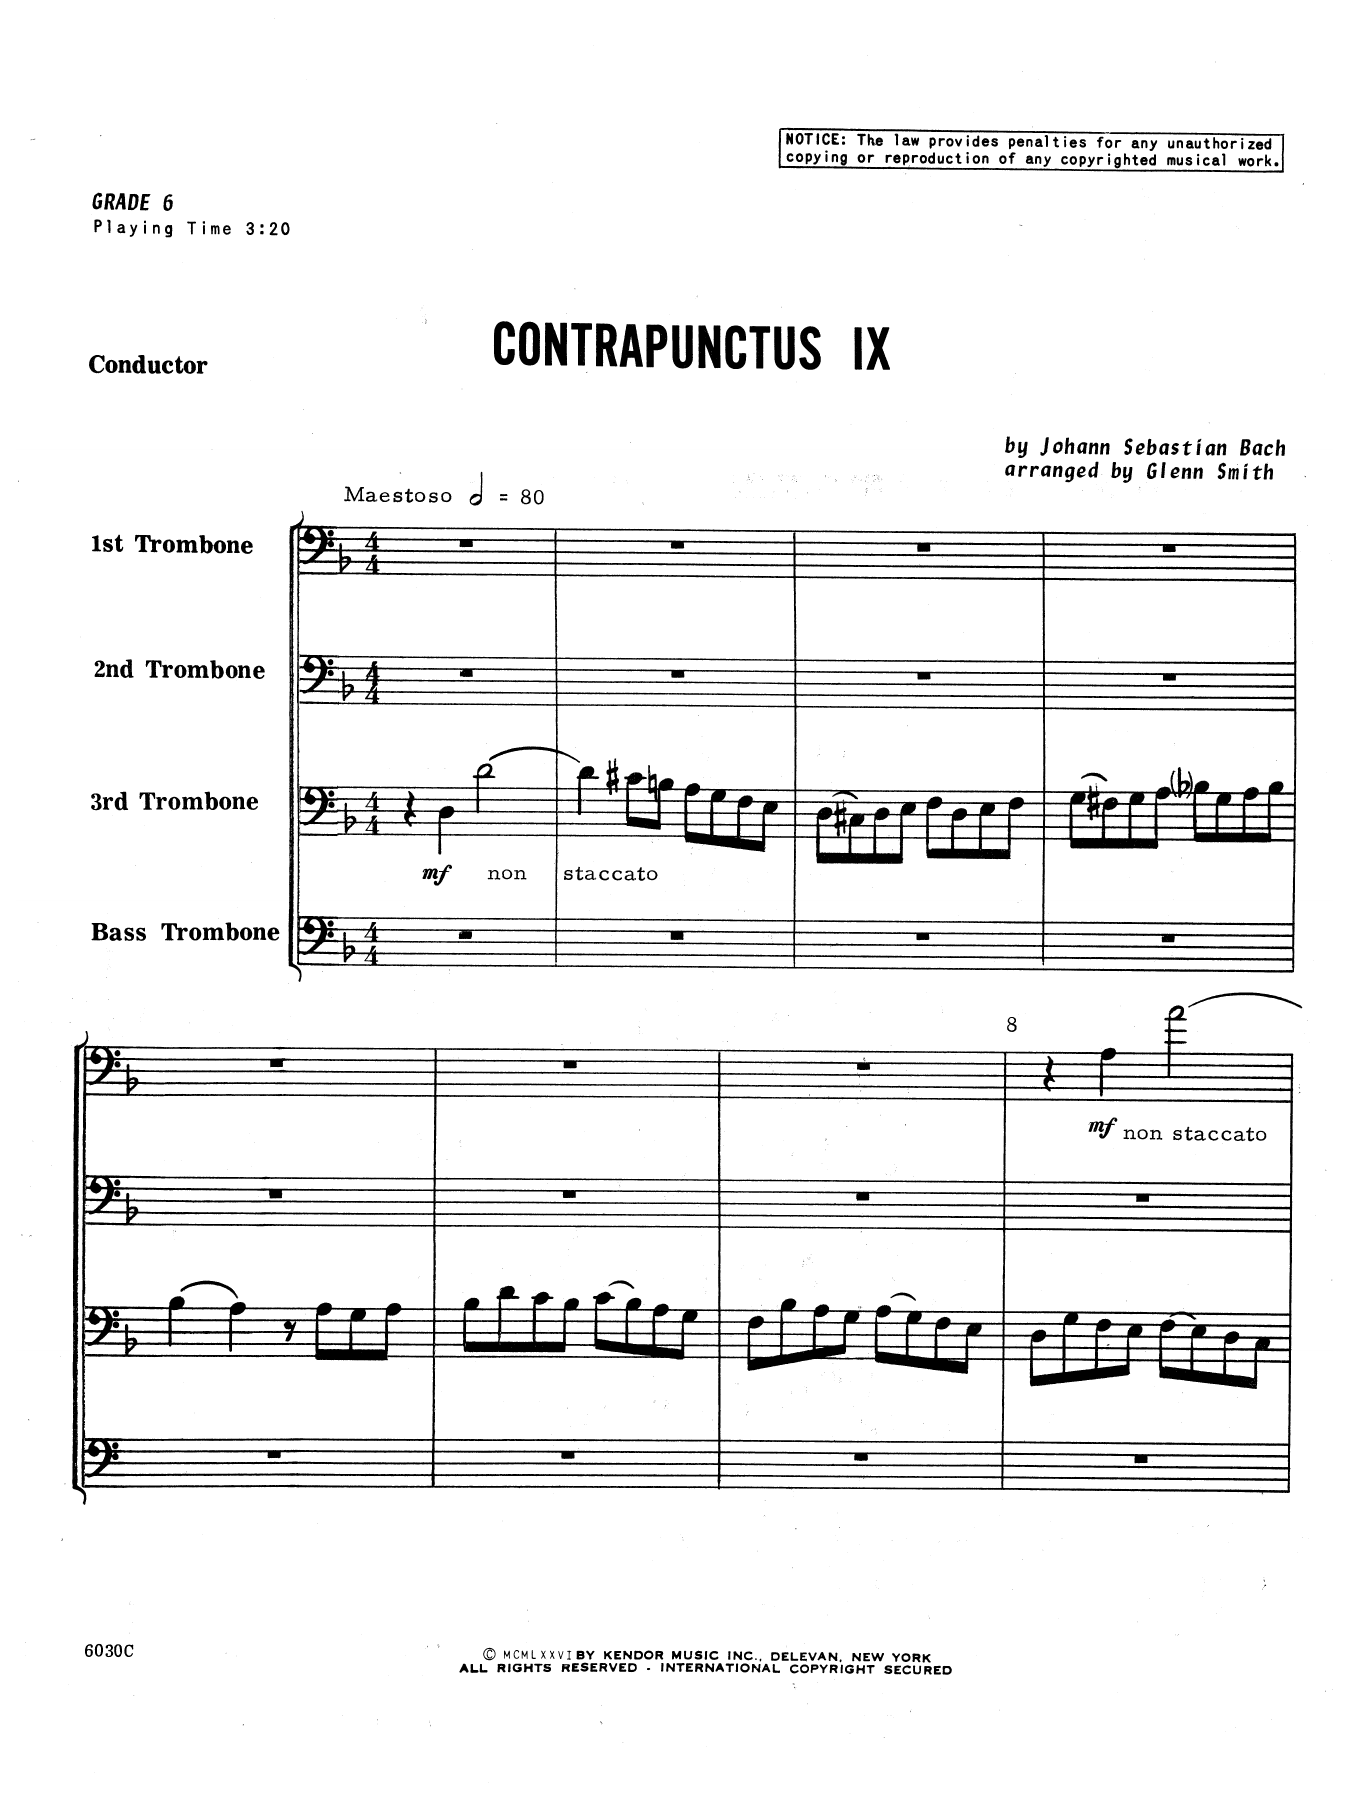 Glen Smith Contrapunctus IX - Full Score sheet music notes and chords. Download Printable PDF.